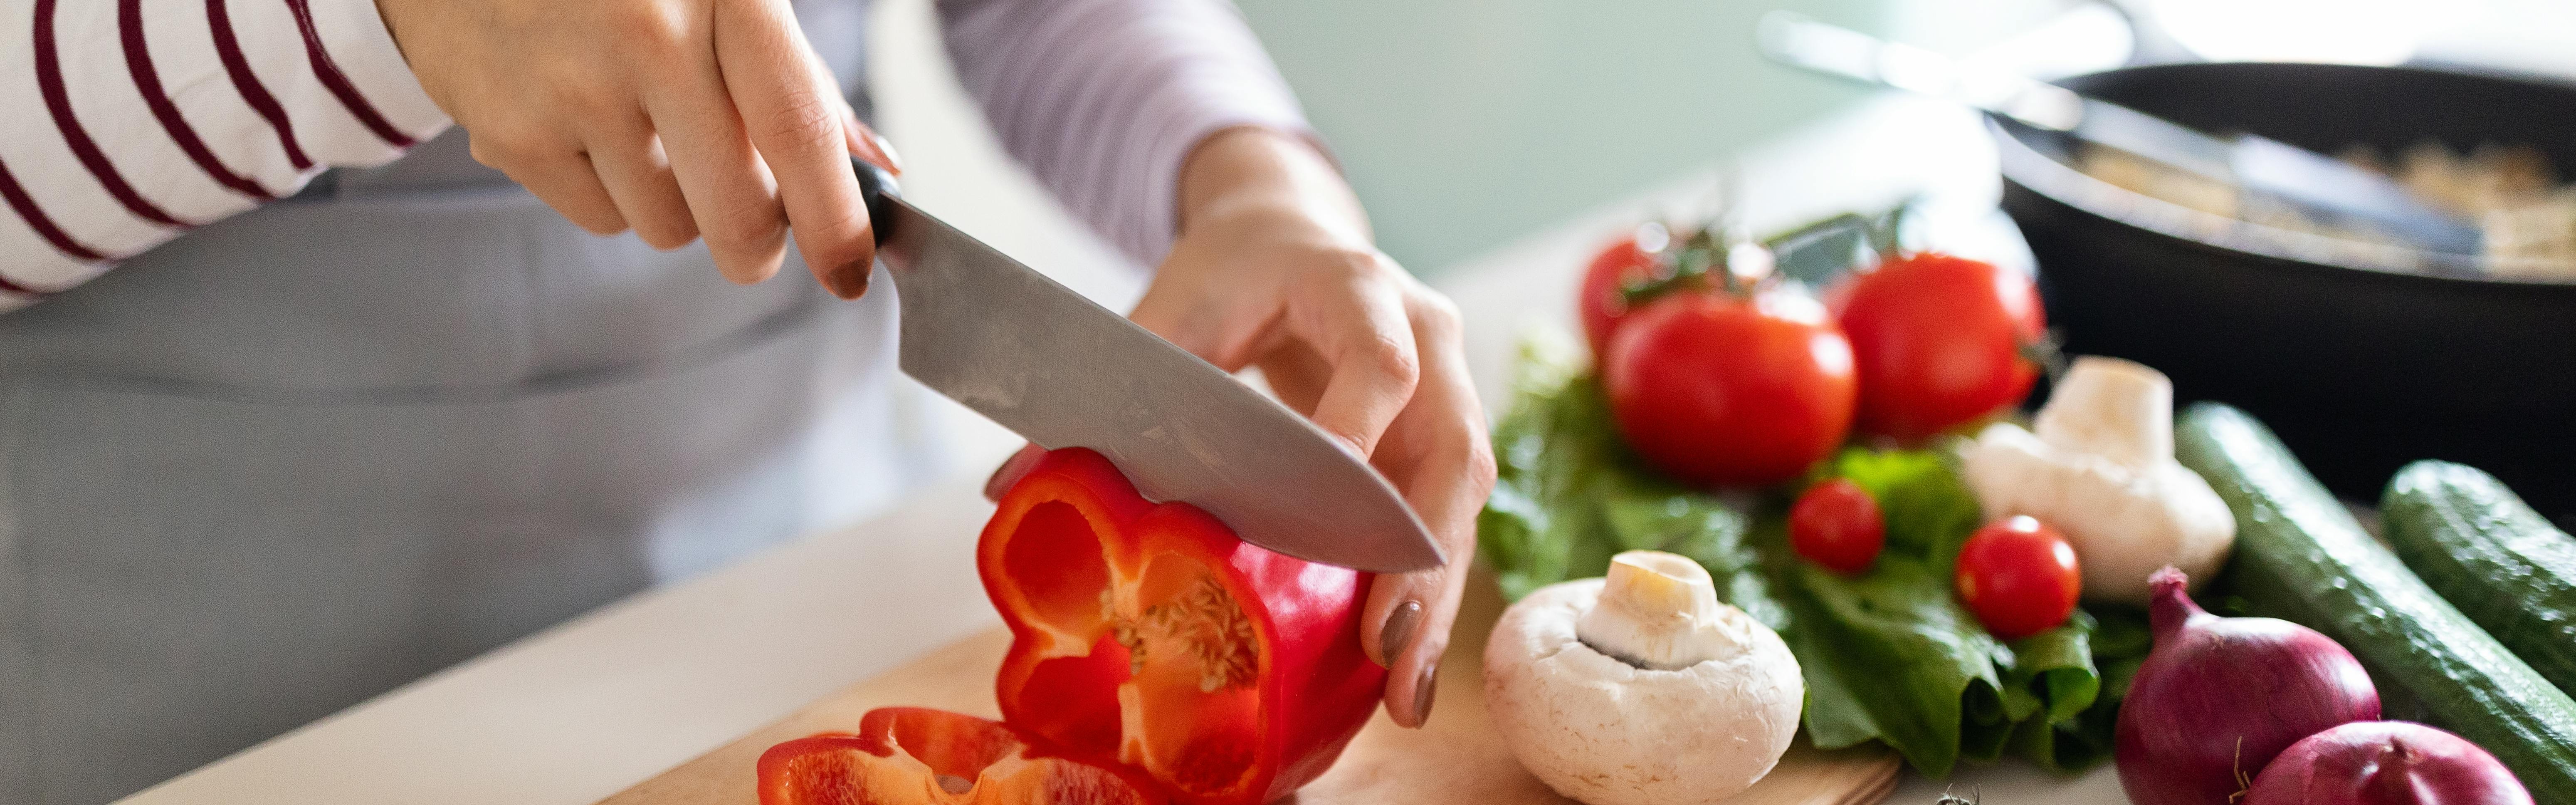 All About Ceramic Knives, and Why They are Healthier! - Real Food RN